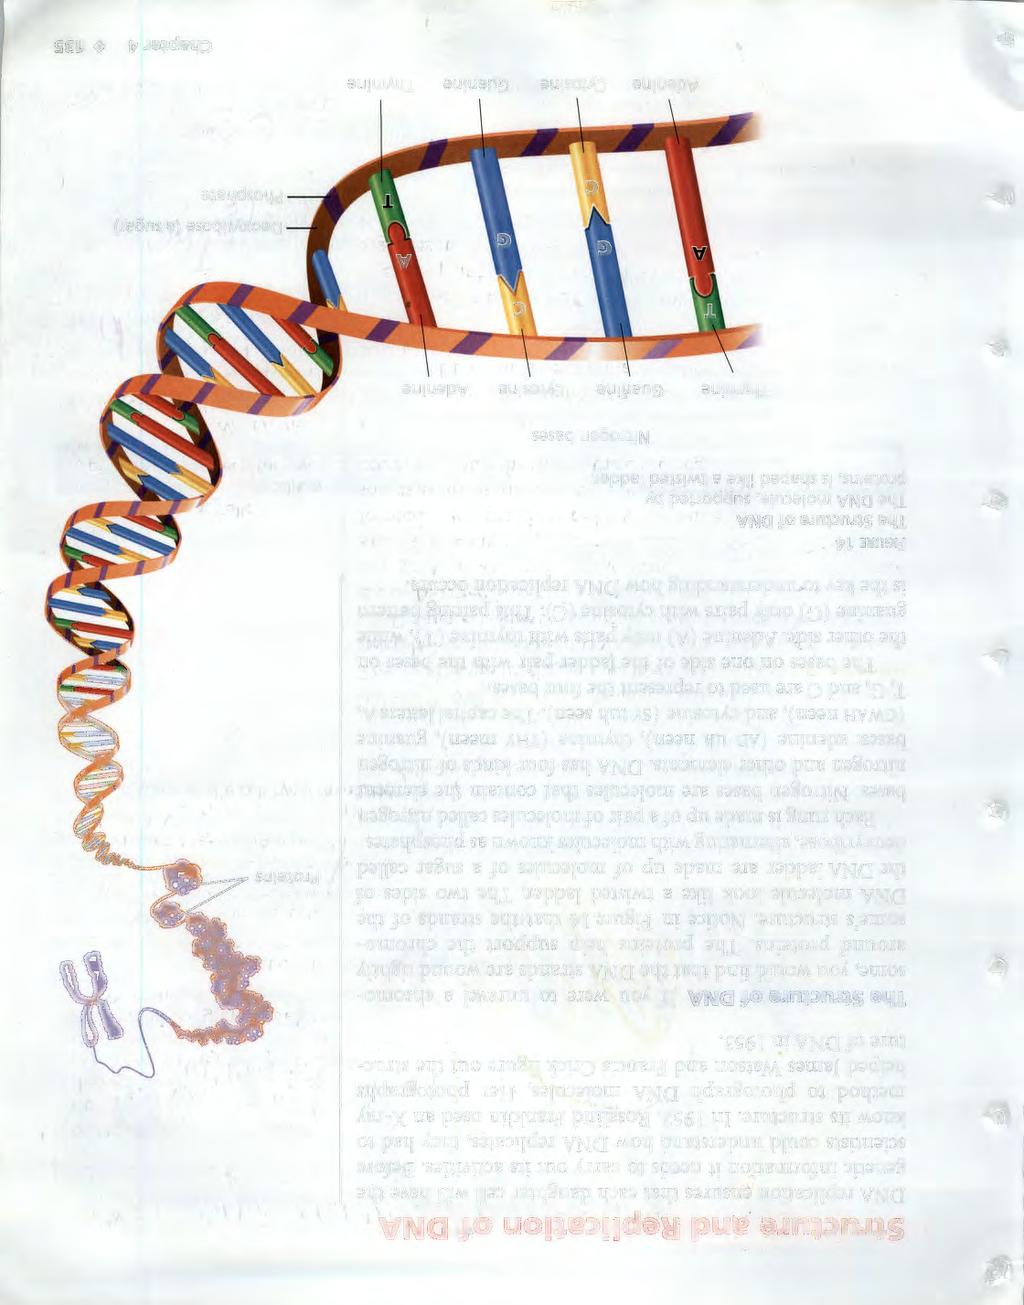 Structure.Clnd Replication of DNA DNA replication ensures that each daughter cell will have the genetic information it needs to carry out its activities.